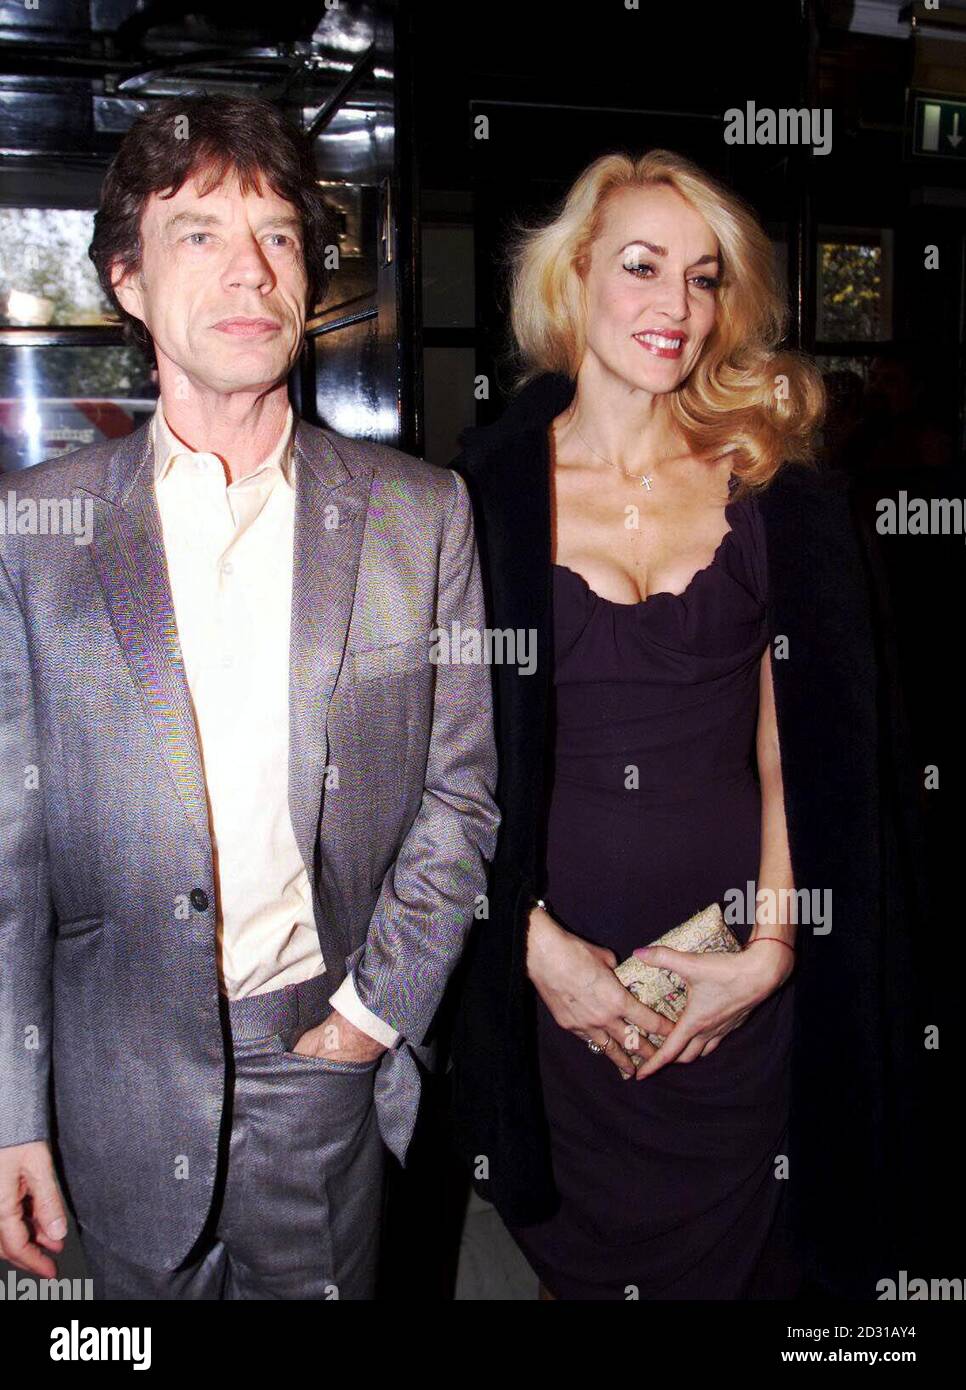 Model Jerry Hall and Rolling Stones singer Mick Jagger arrive at the Evening Standard Drama Awards at the Savoy Hotel, in central London. Stock Photo